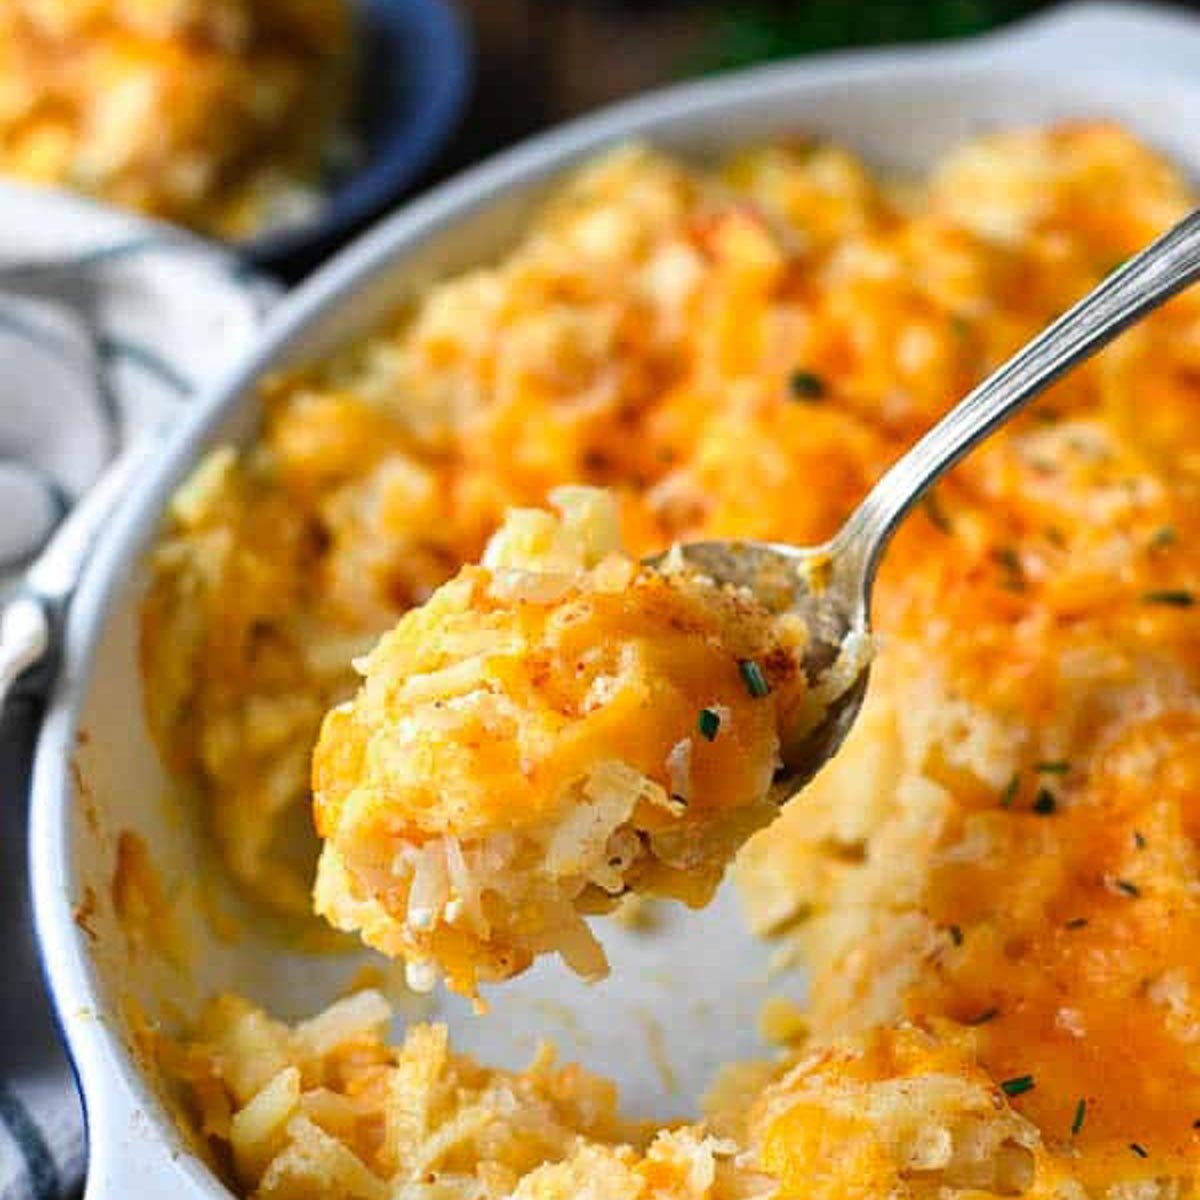 15 Casseroles You Can Make in Just One Hour